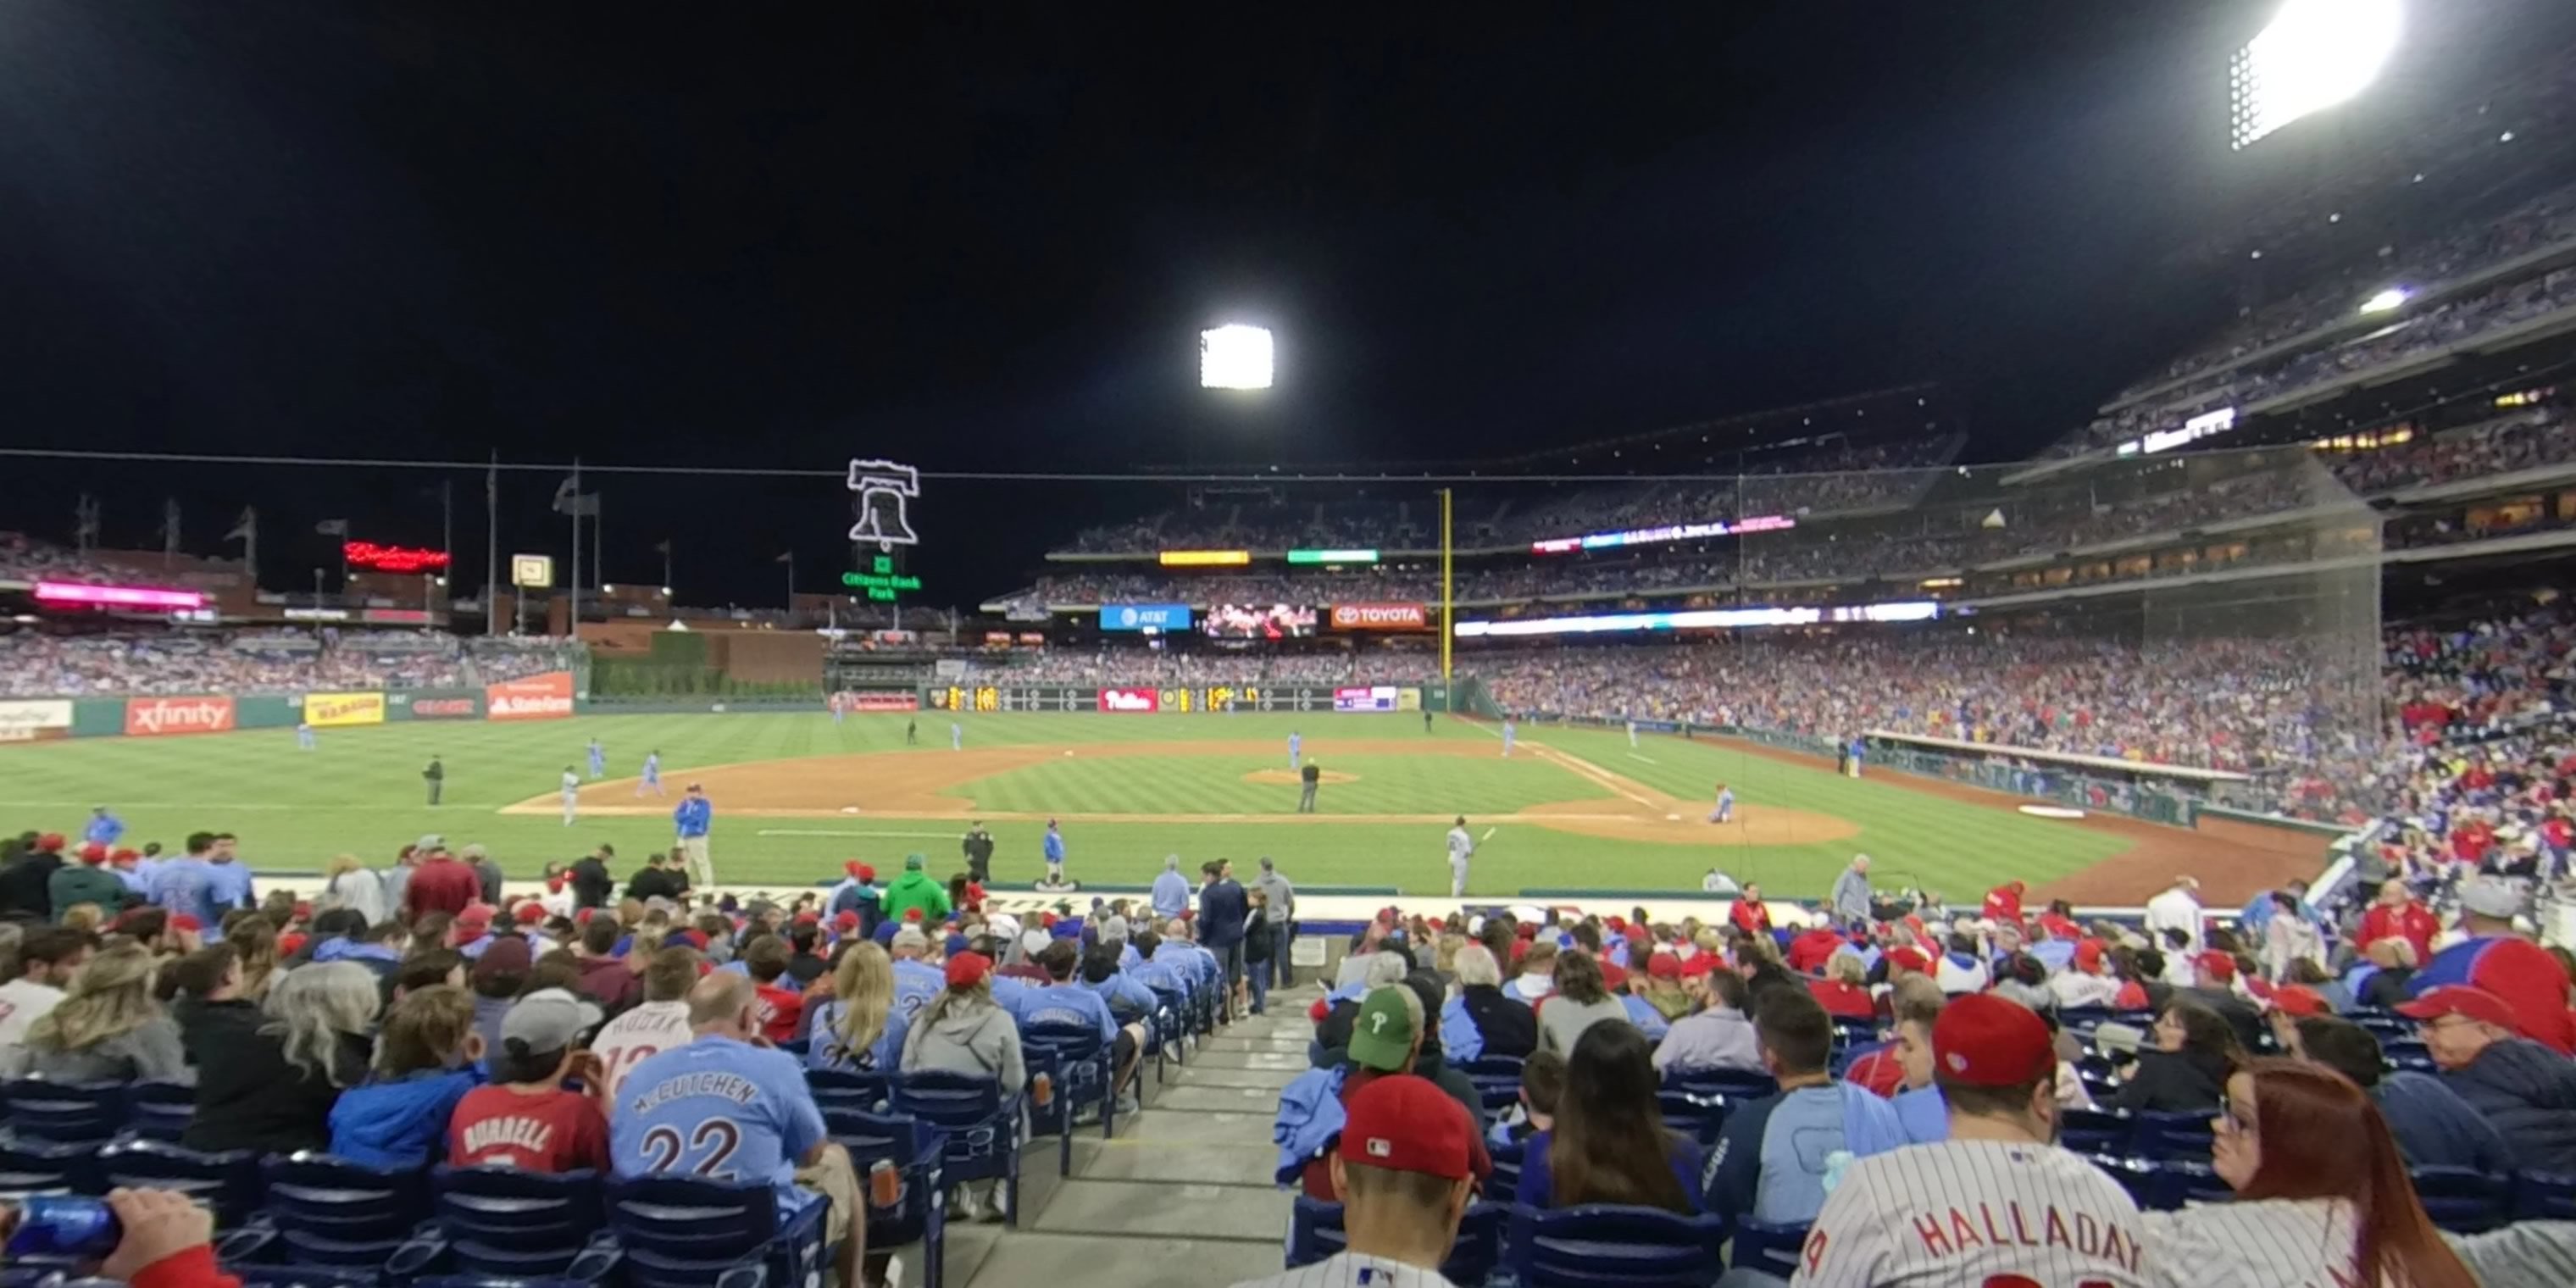 section 129 panoramic seat view  for baseball - citizens bank park